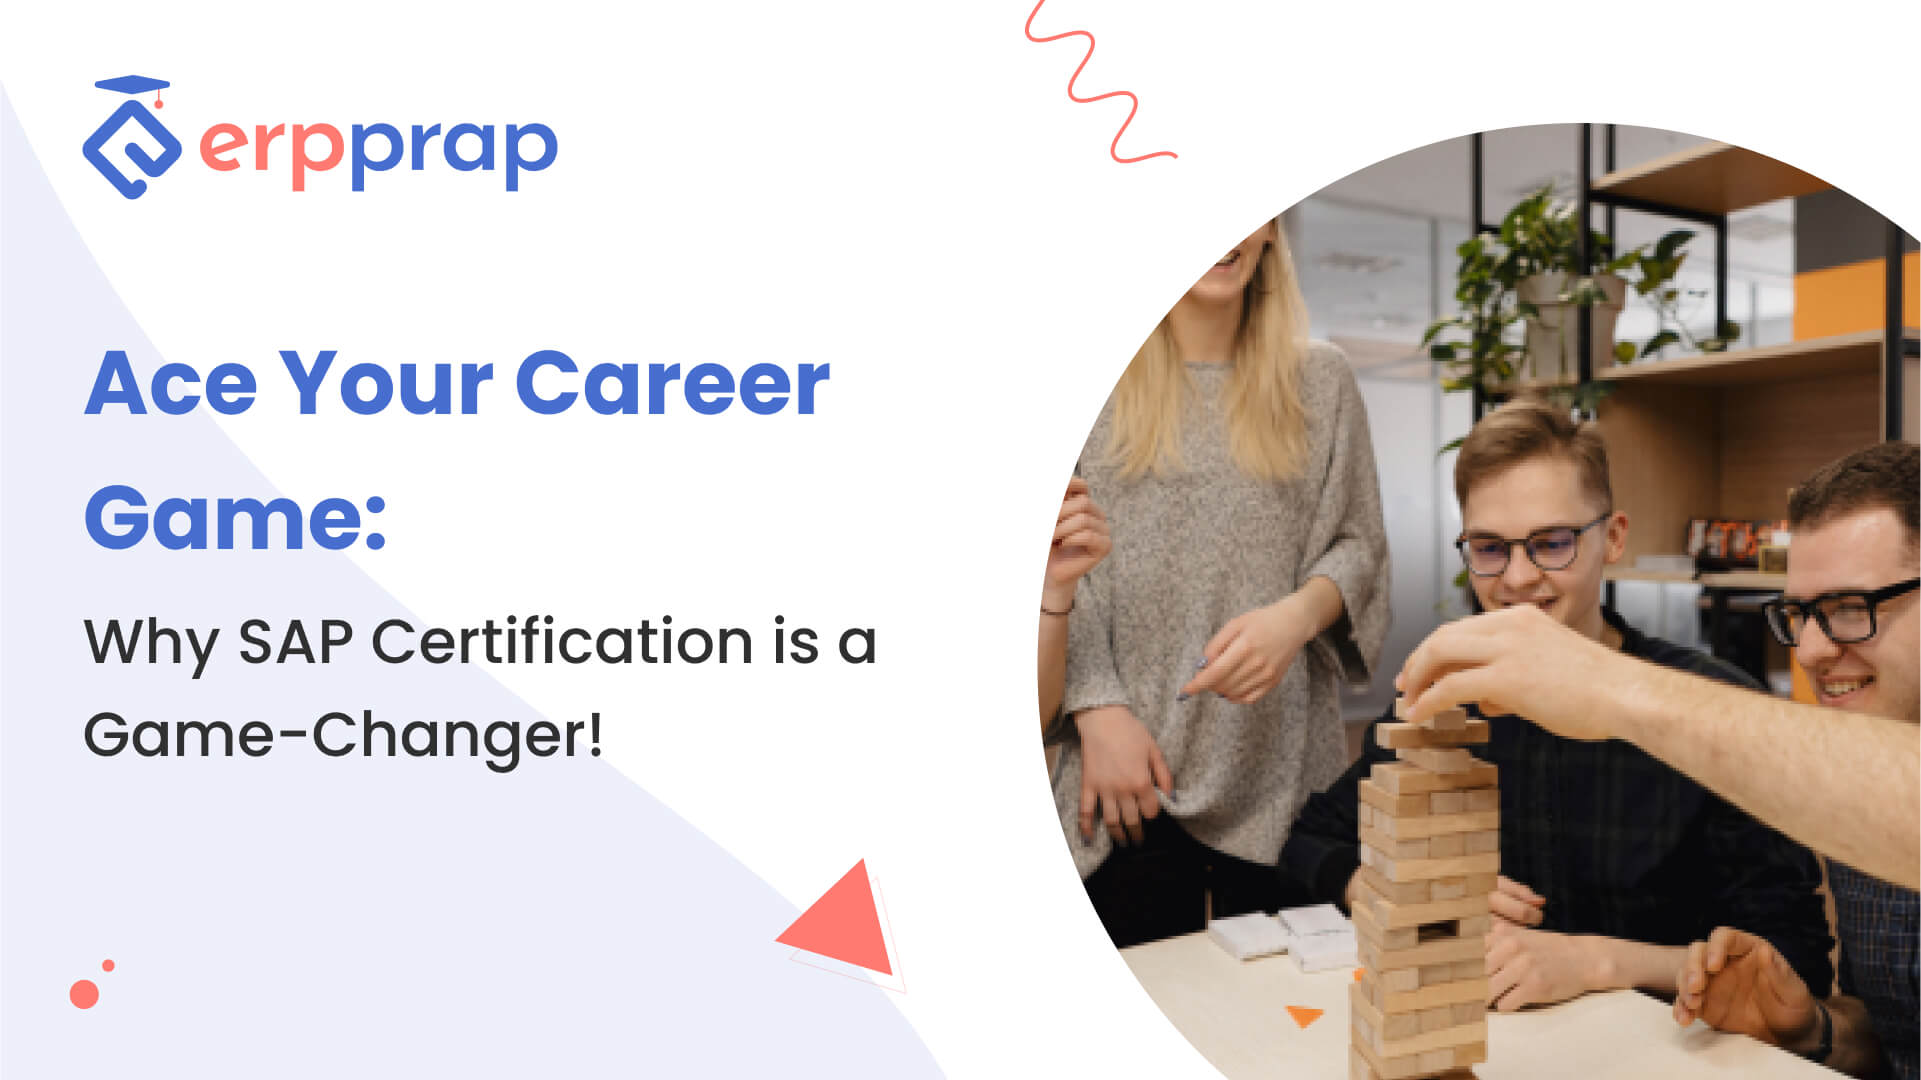 Ace Your Career Game: Why SAP Certification is a Game-Changer!